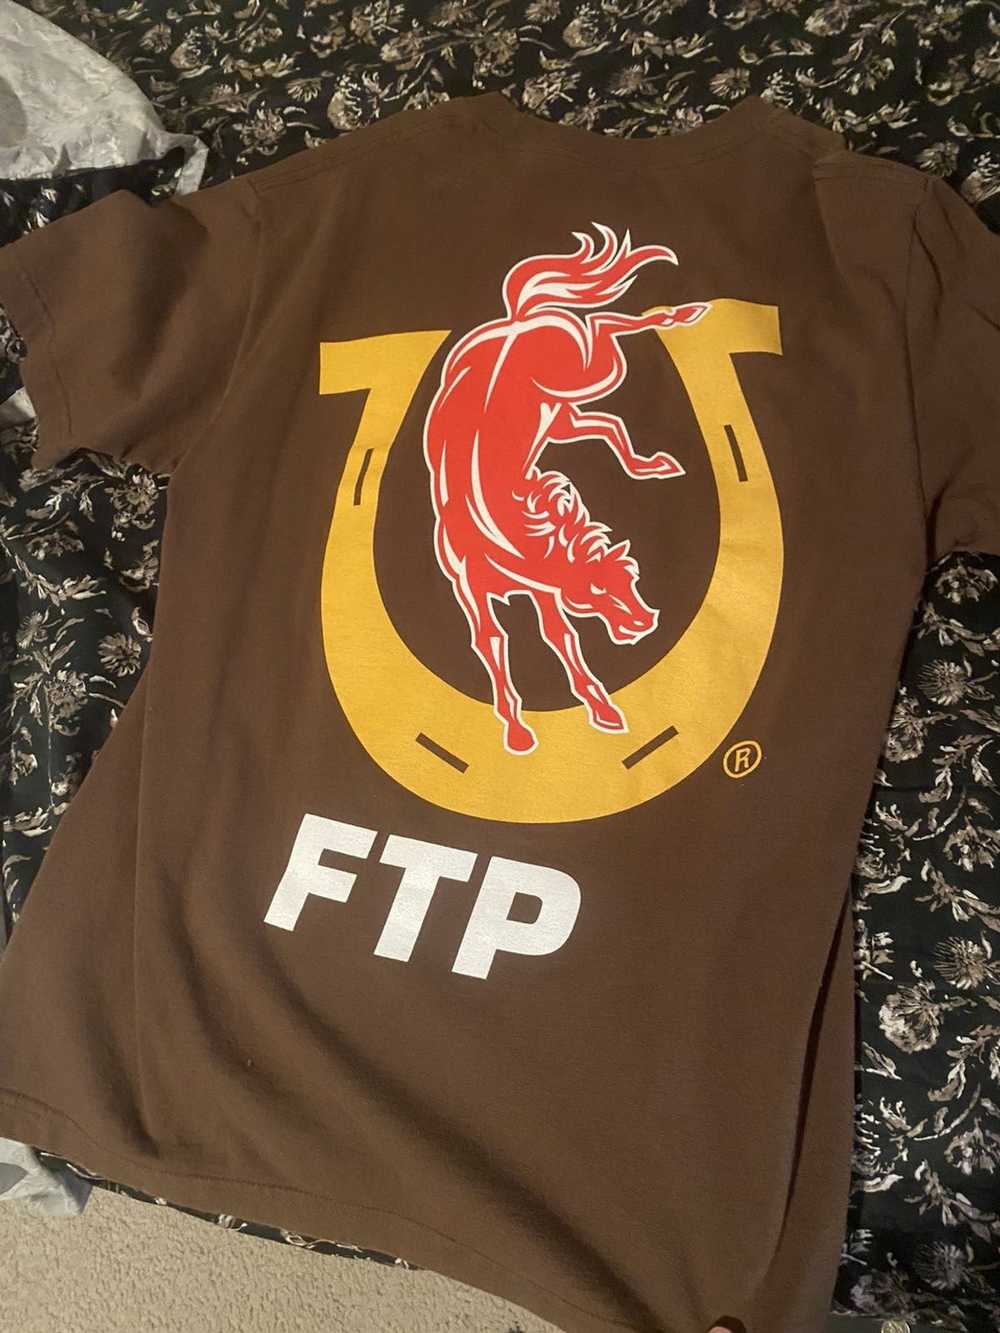 Fuck The Population Ftp colt 45 tee - image 2